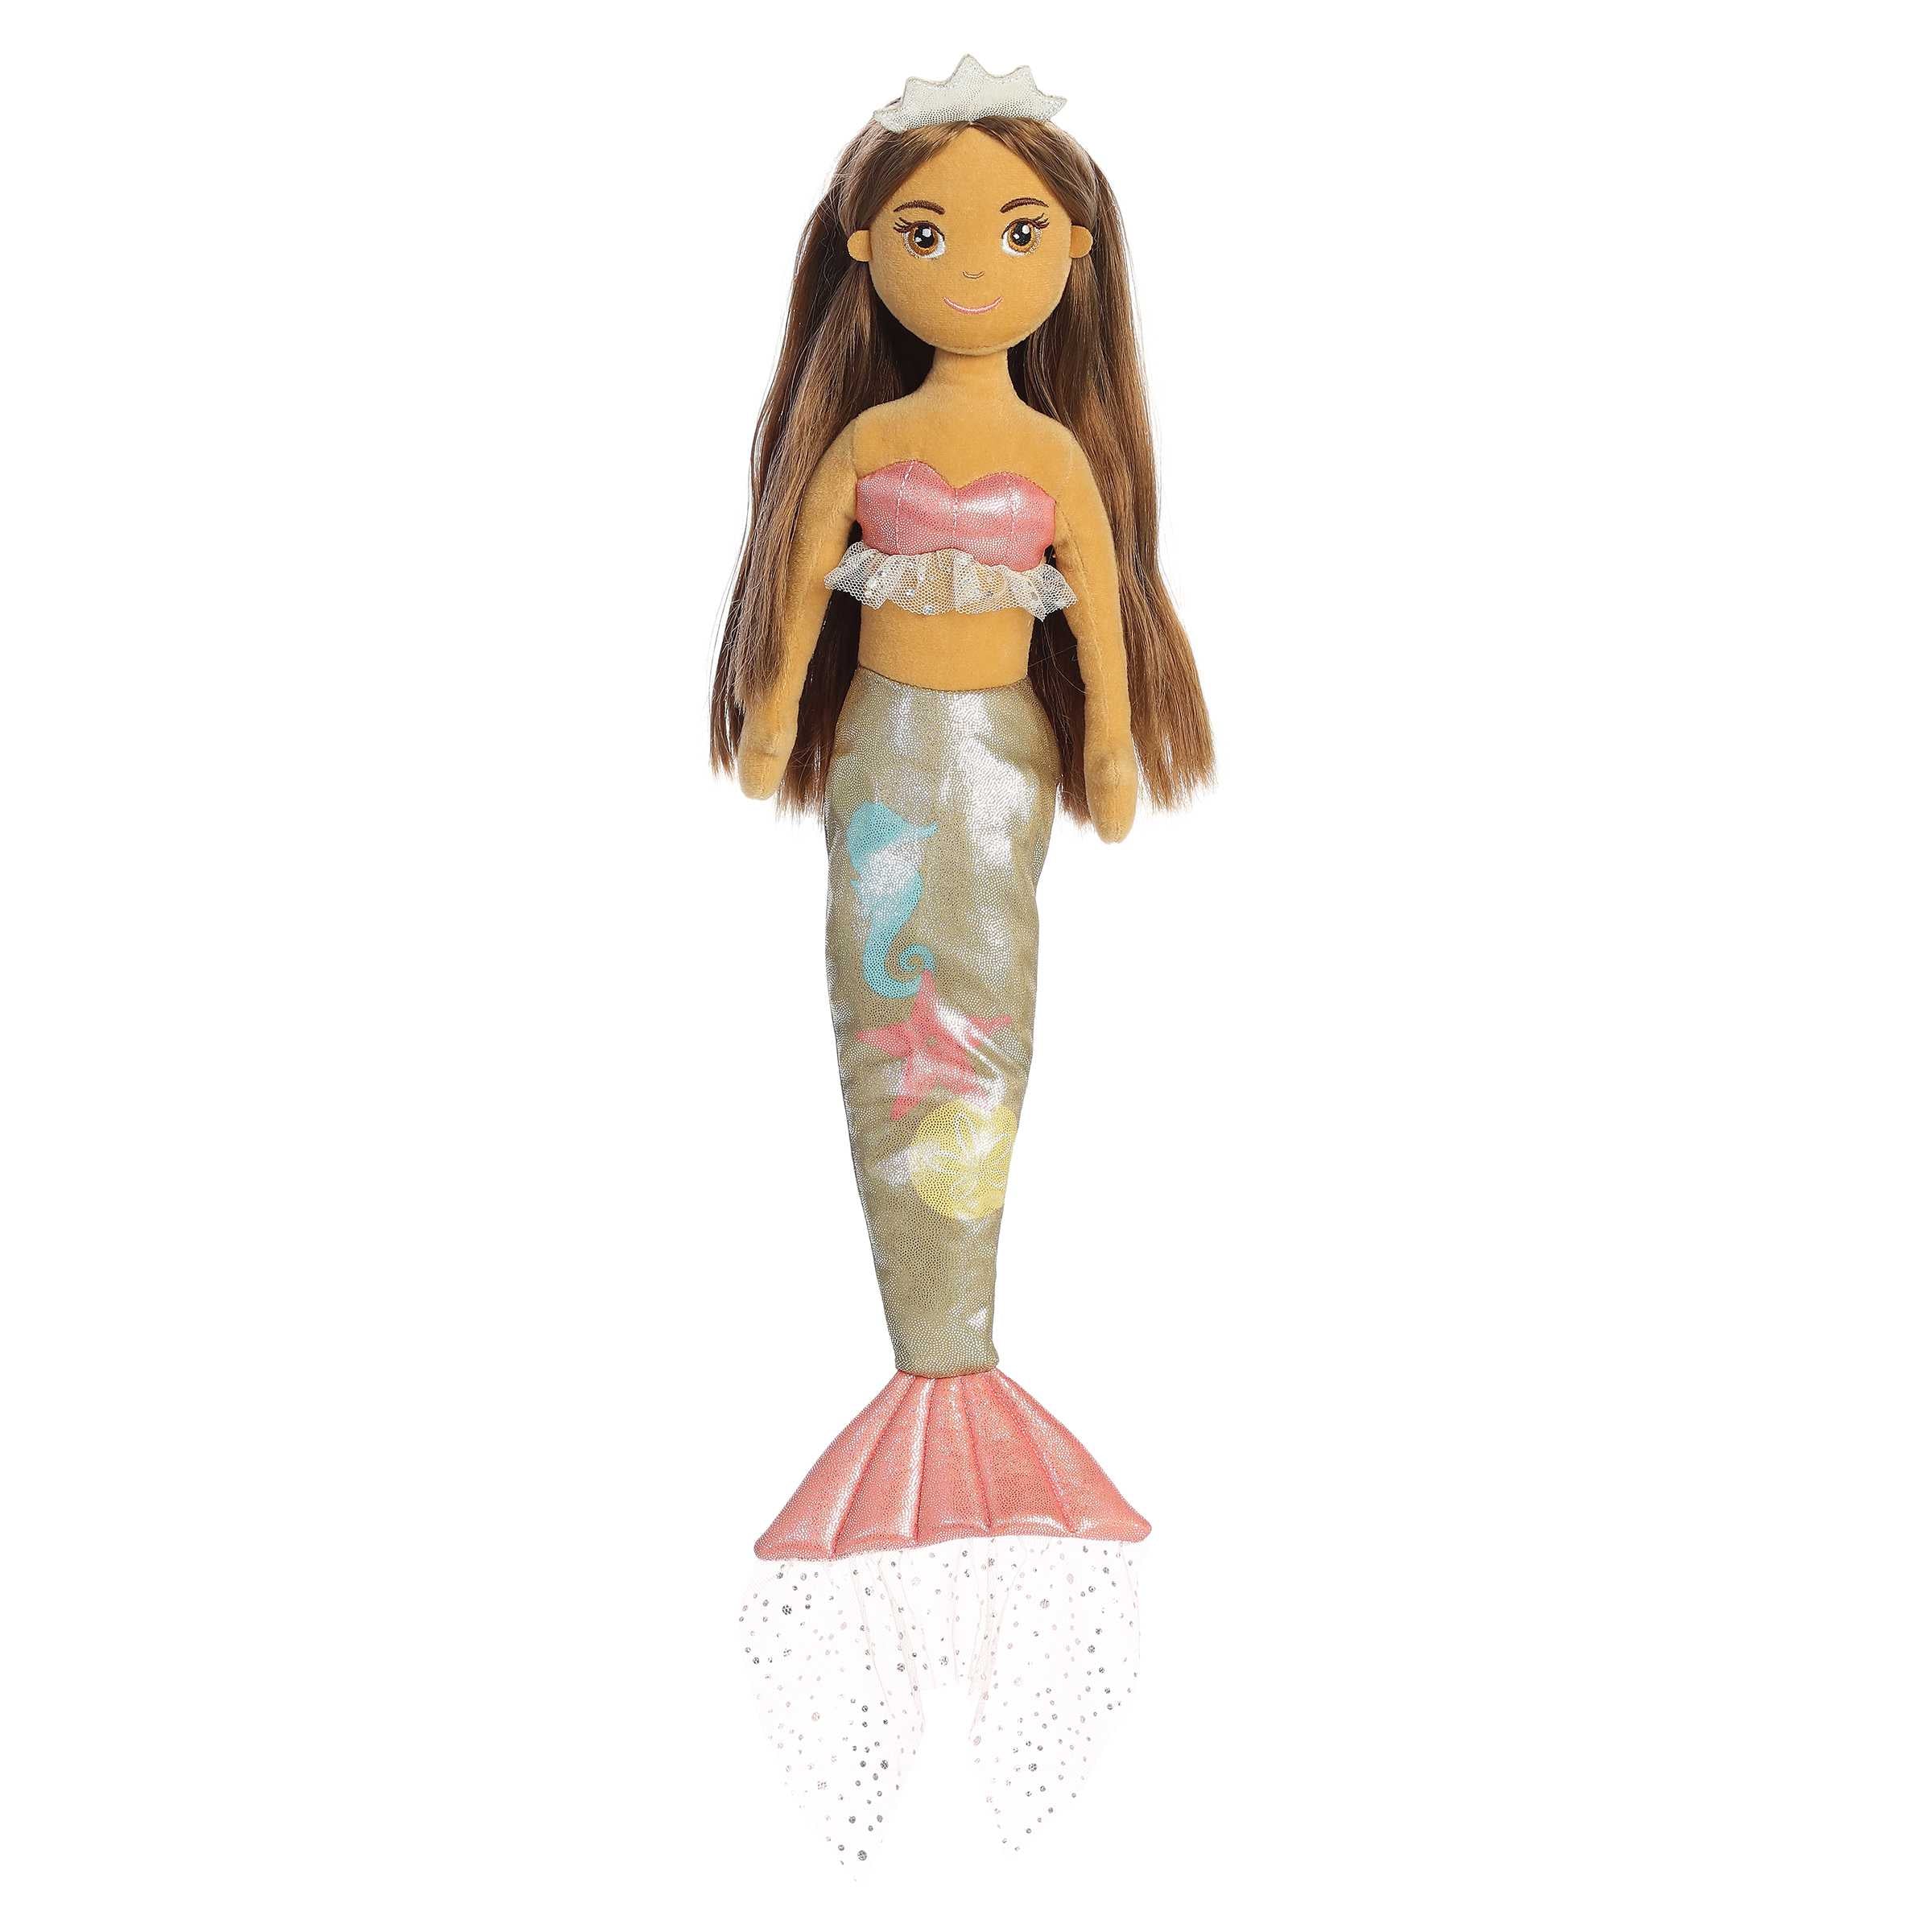 Shelly mermaid plush with a tail adorned in marine motifs, perfect for adding ocean charm to play and collections.